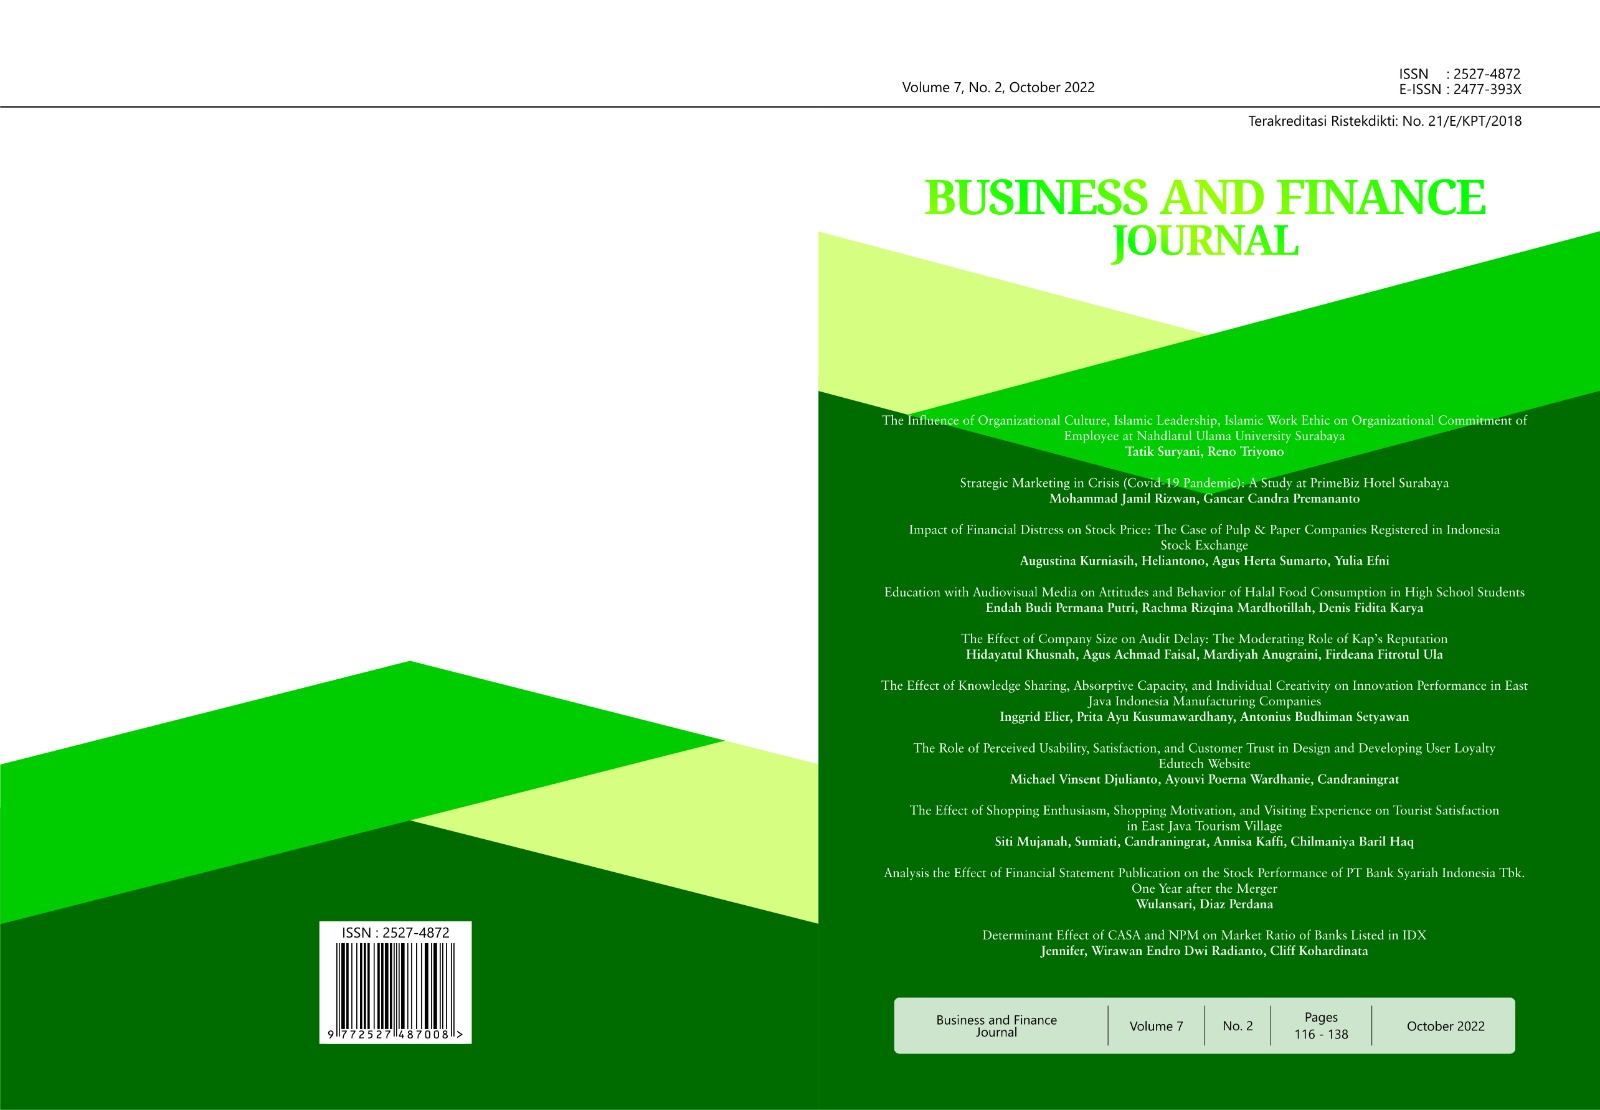 					View Vol. 7 No. 2 (2022): Business and Finance Journal
				